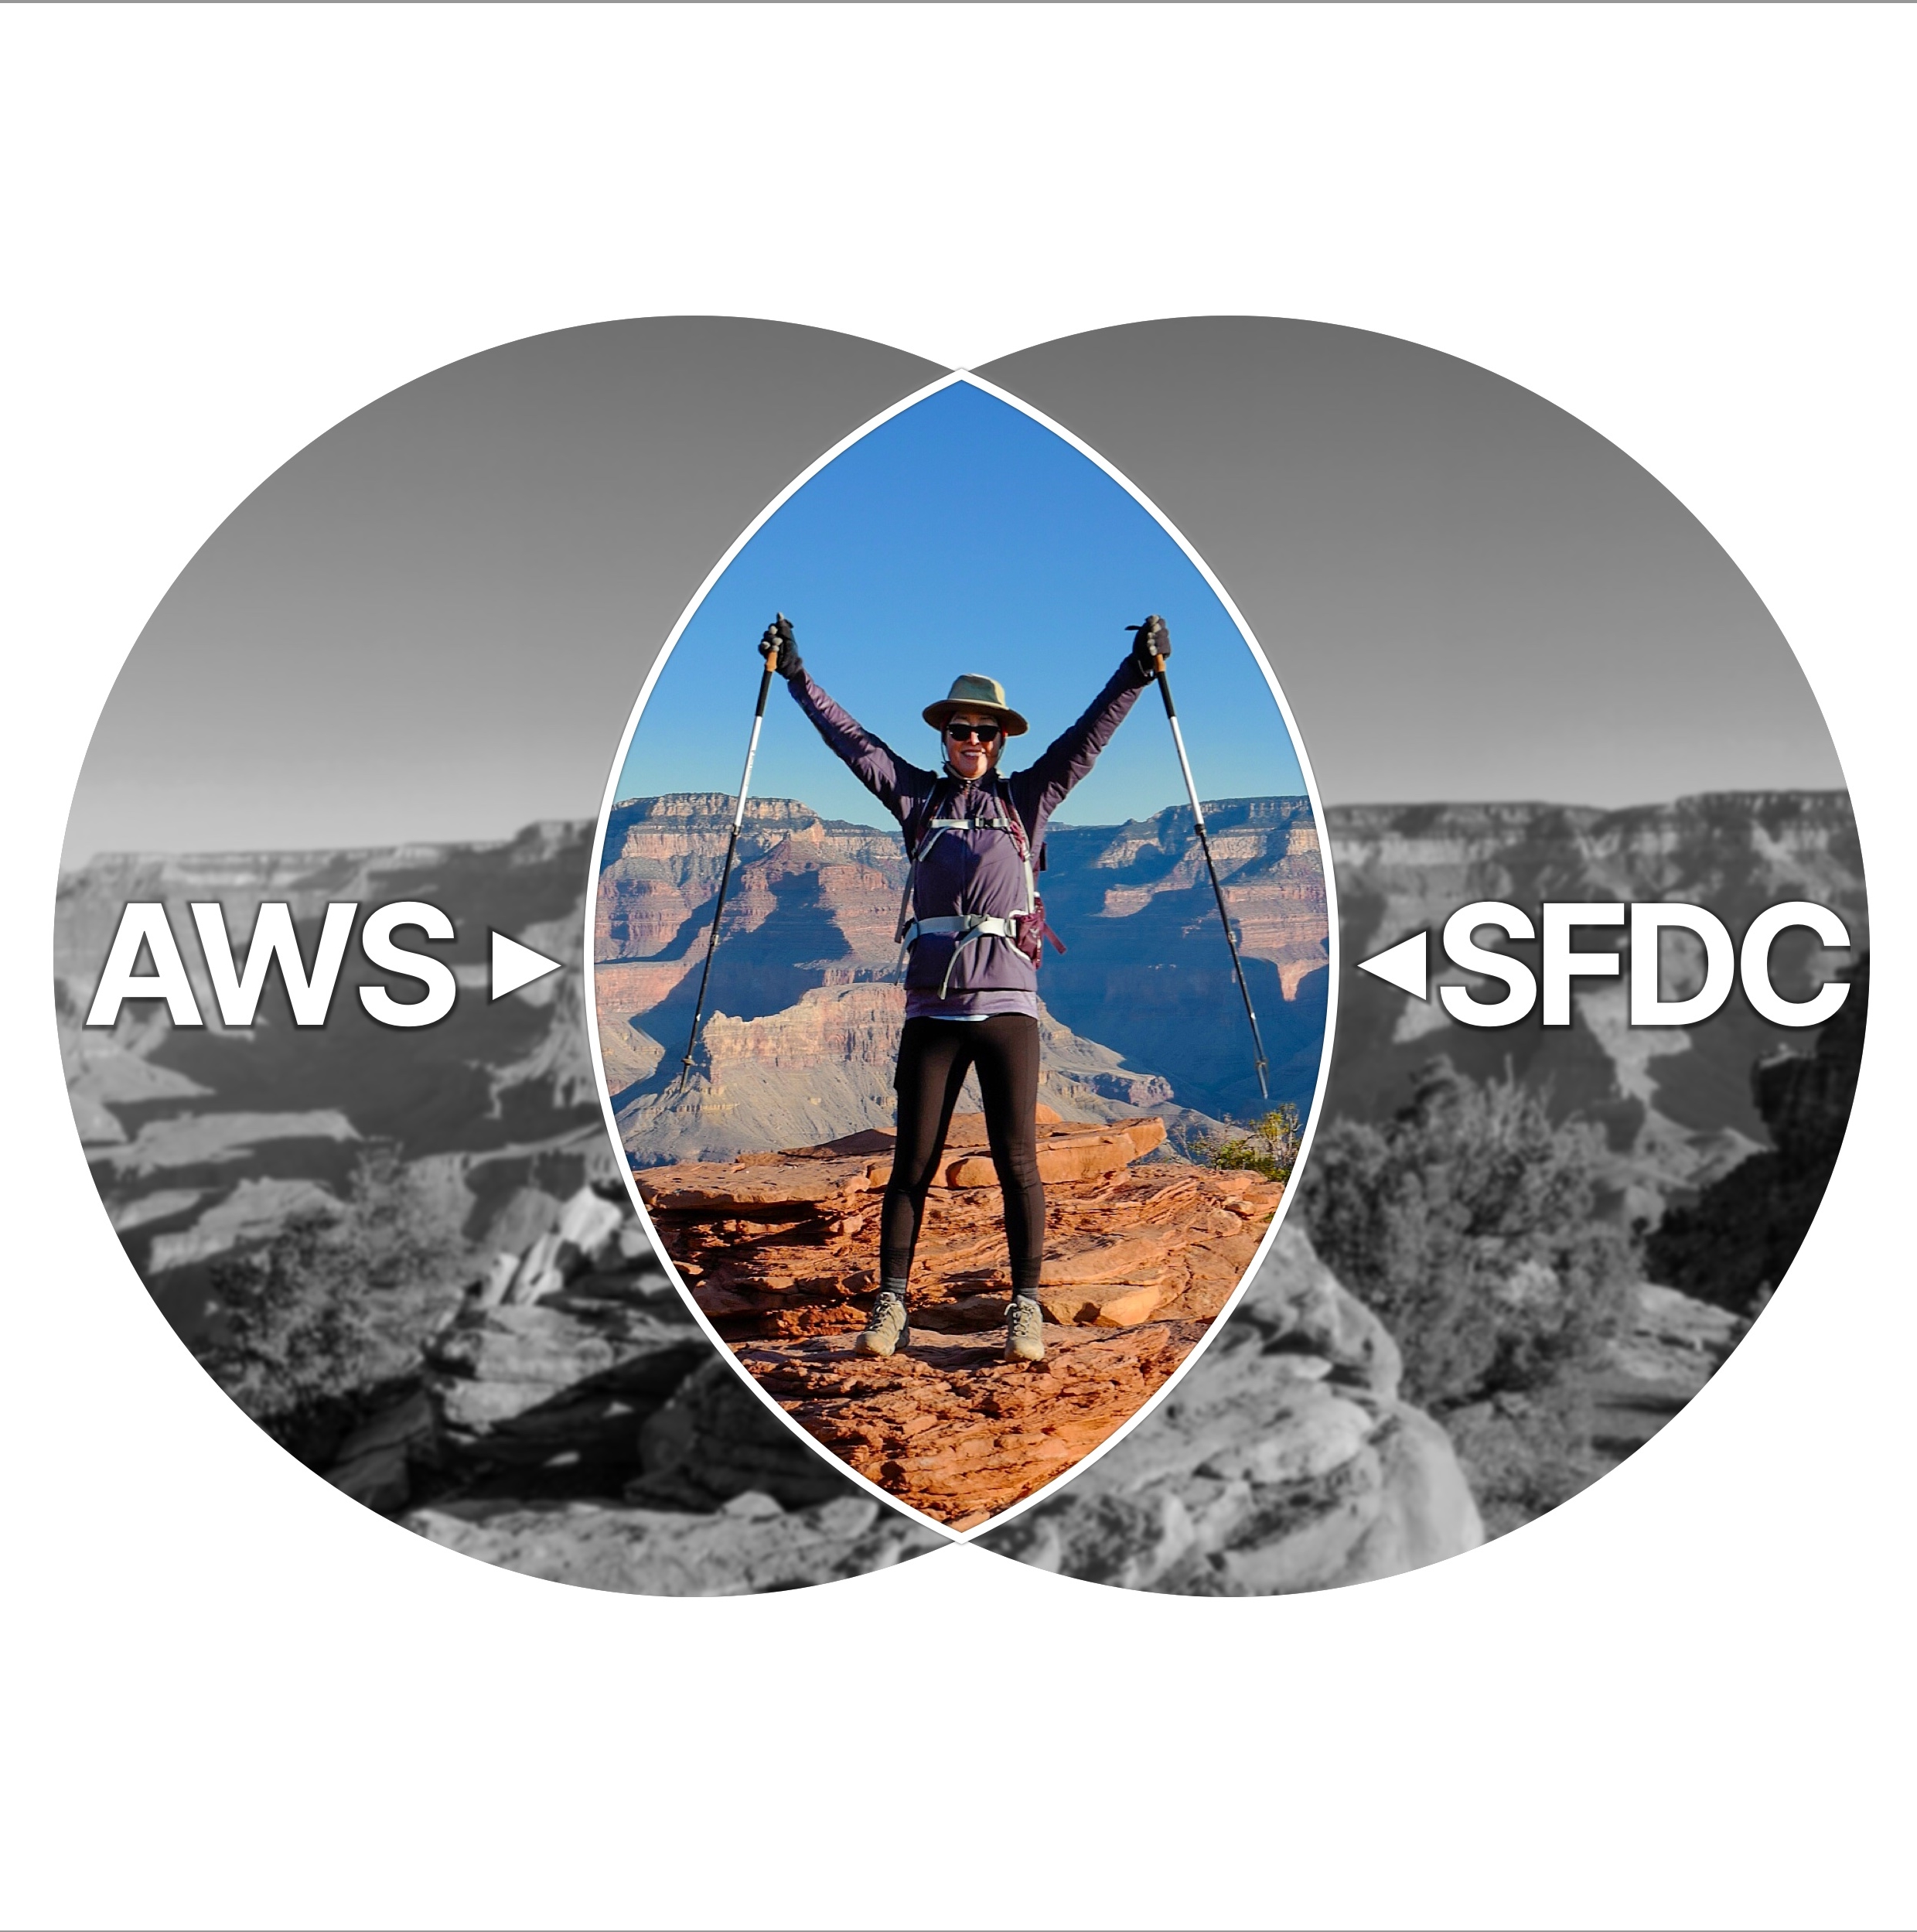 Picking the Right Platform: How to Choose Between Salesforce and AWS